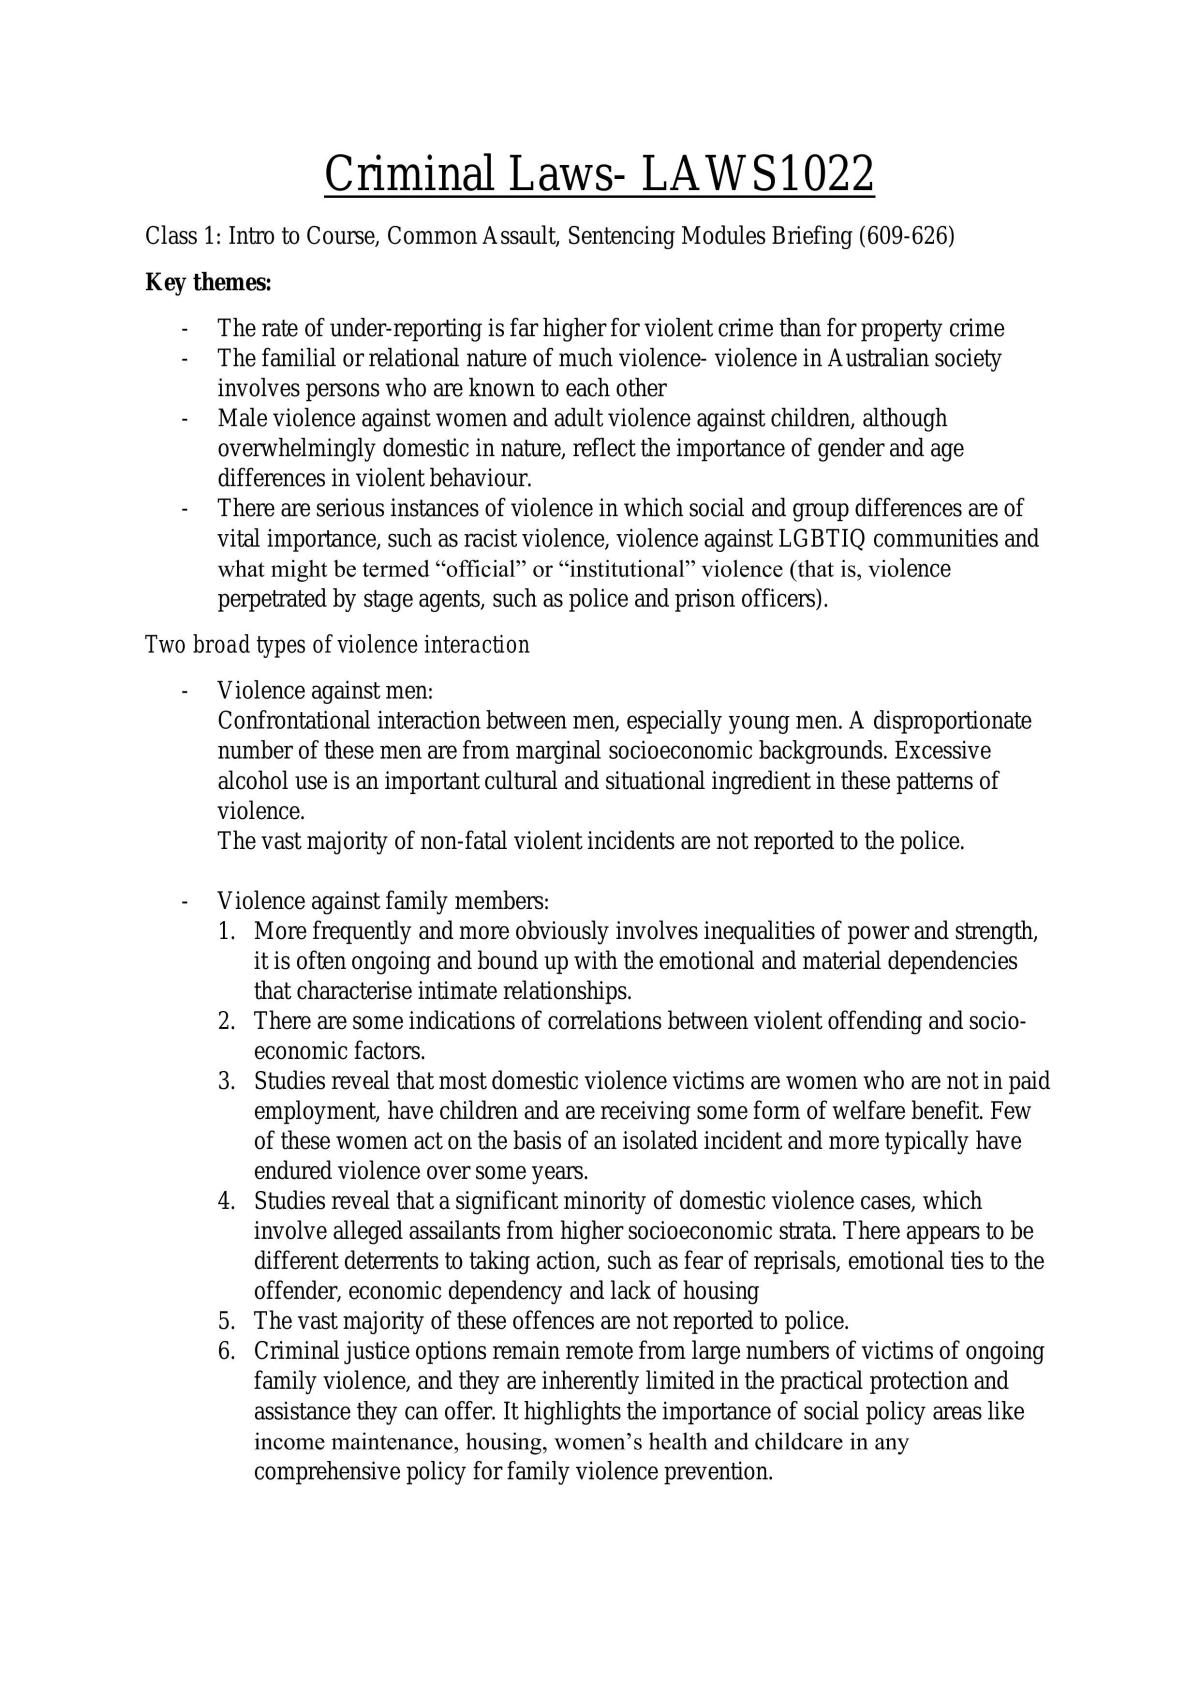 LAWS1022 Complete Notes - Page 1